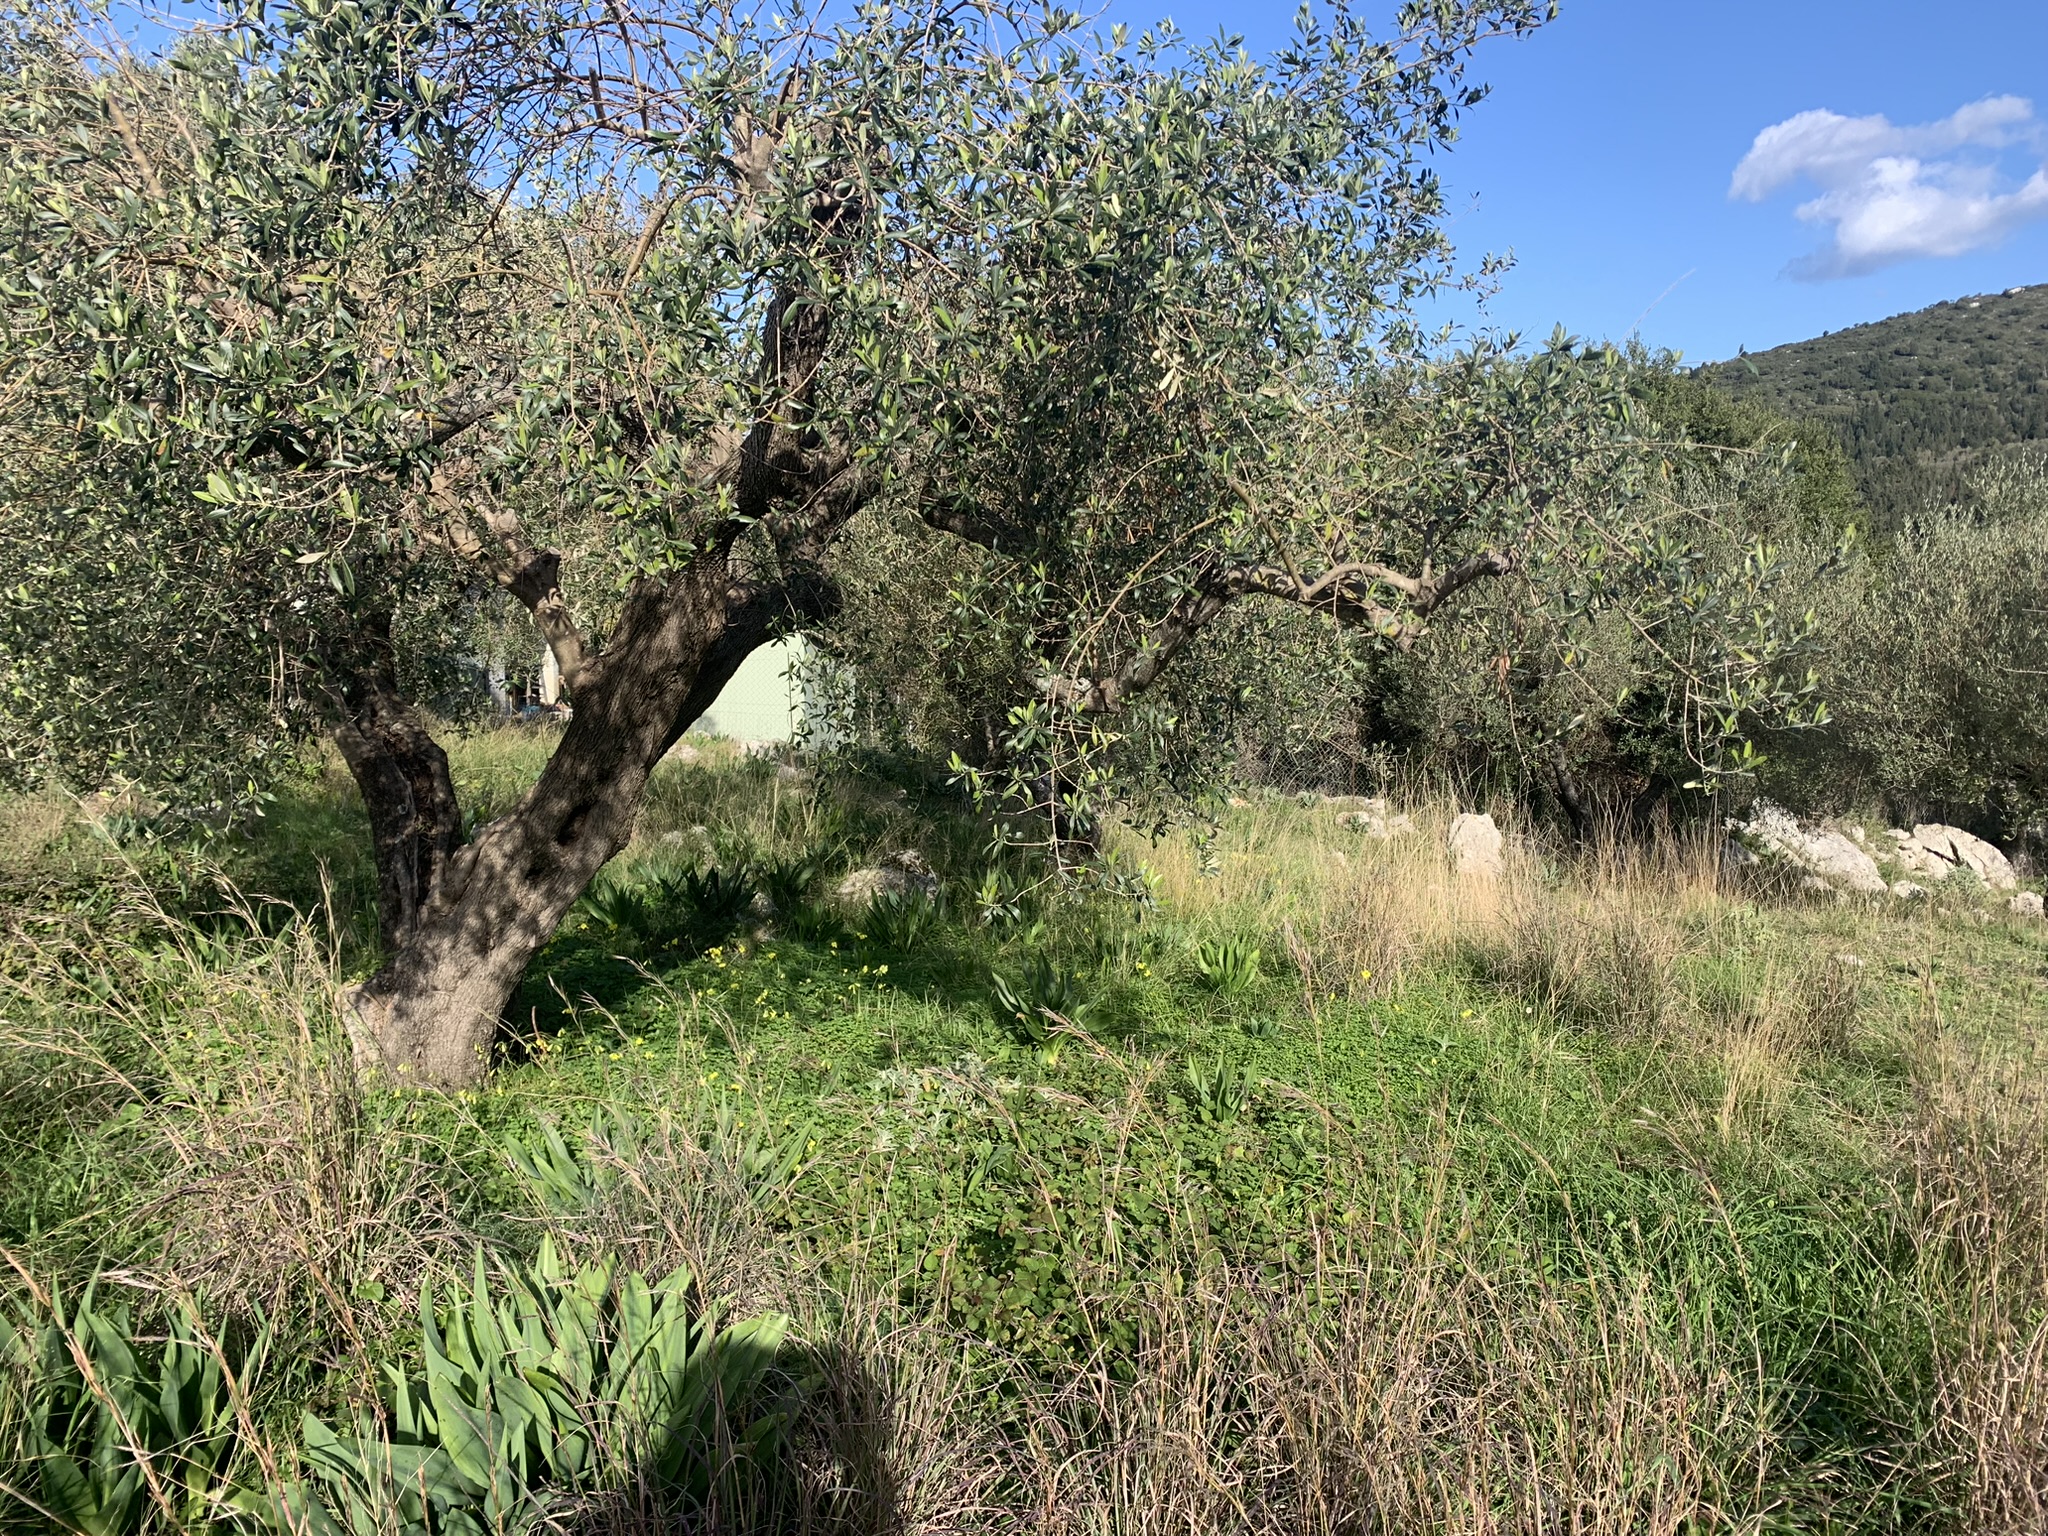 Terrain and landscape of land for sale, Ithaca Greece, Lahos